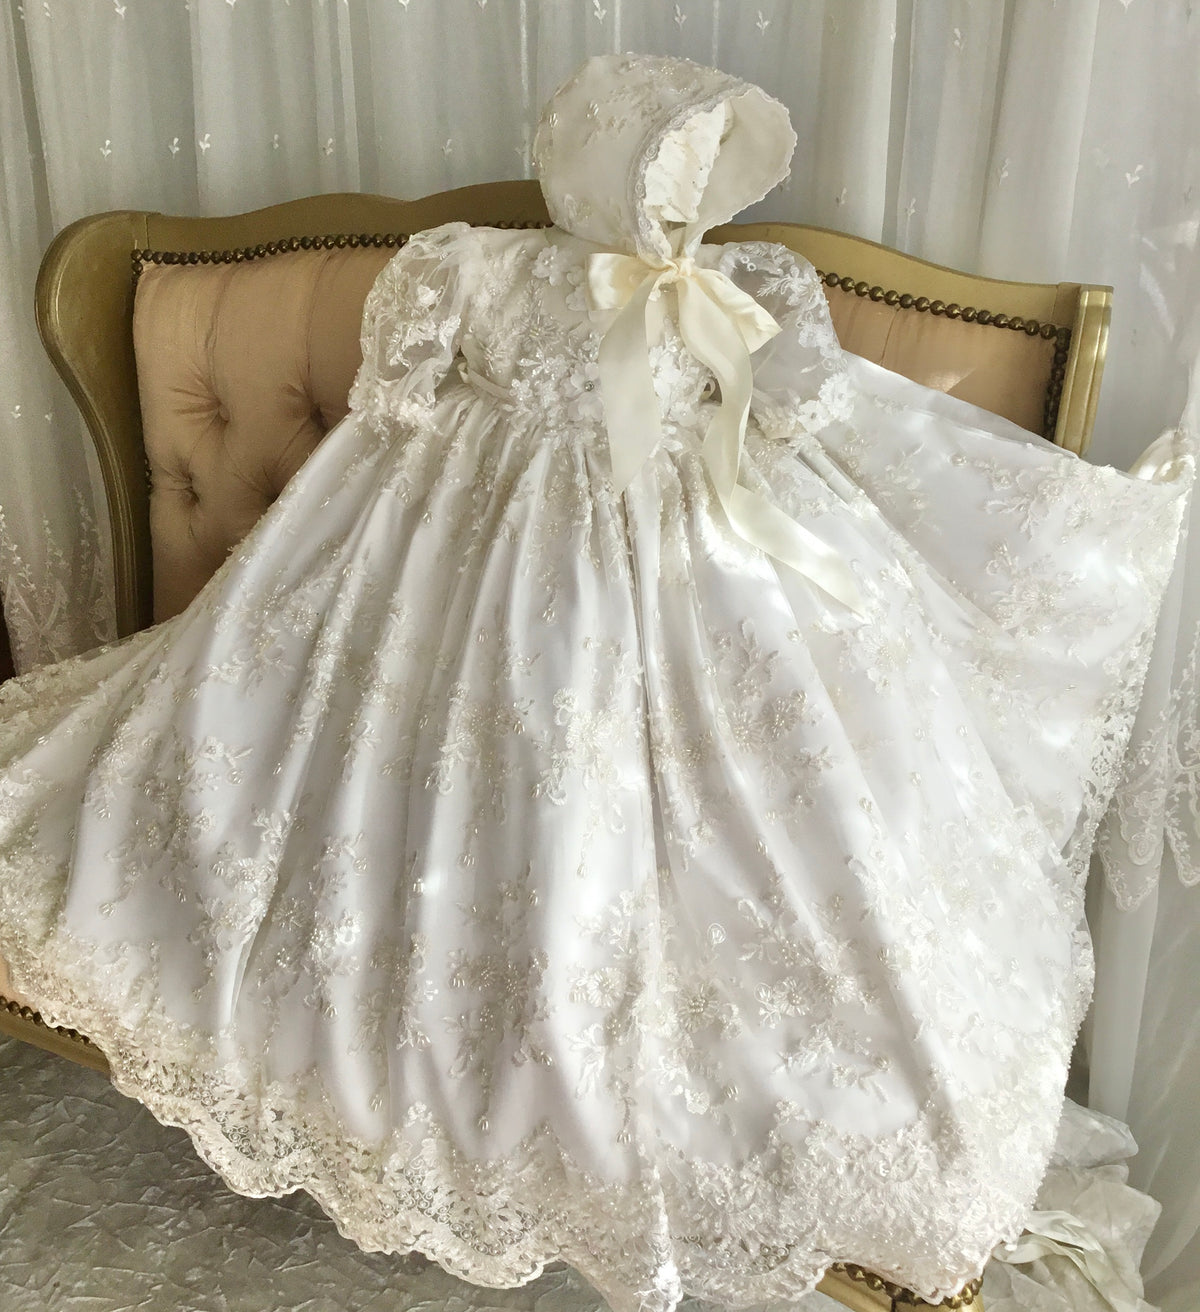 Lace Christening Gown - Leonor 12m